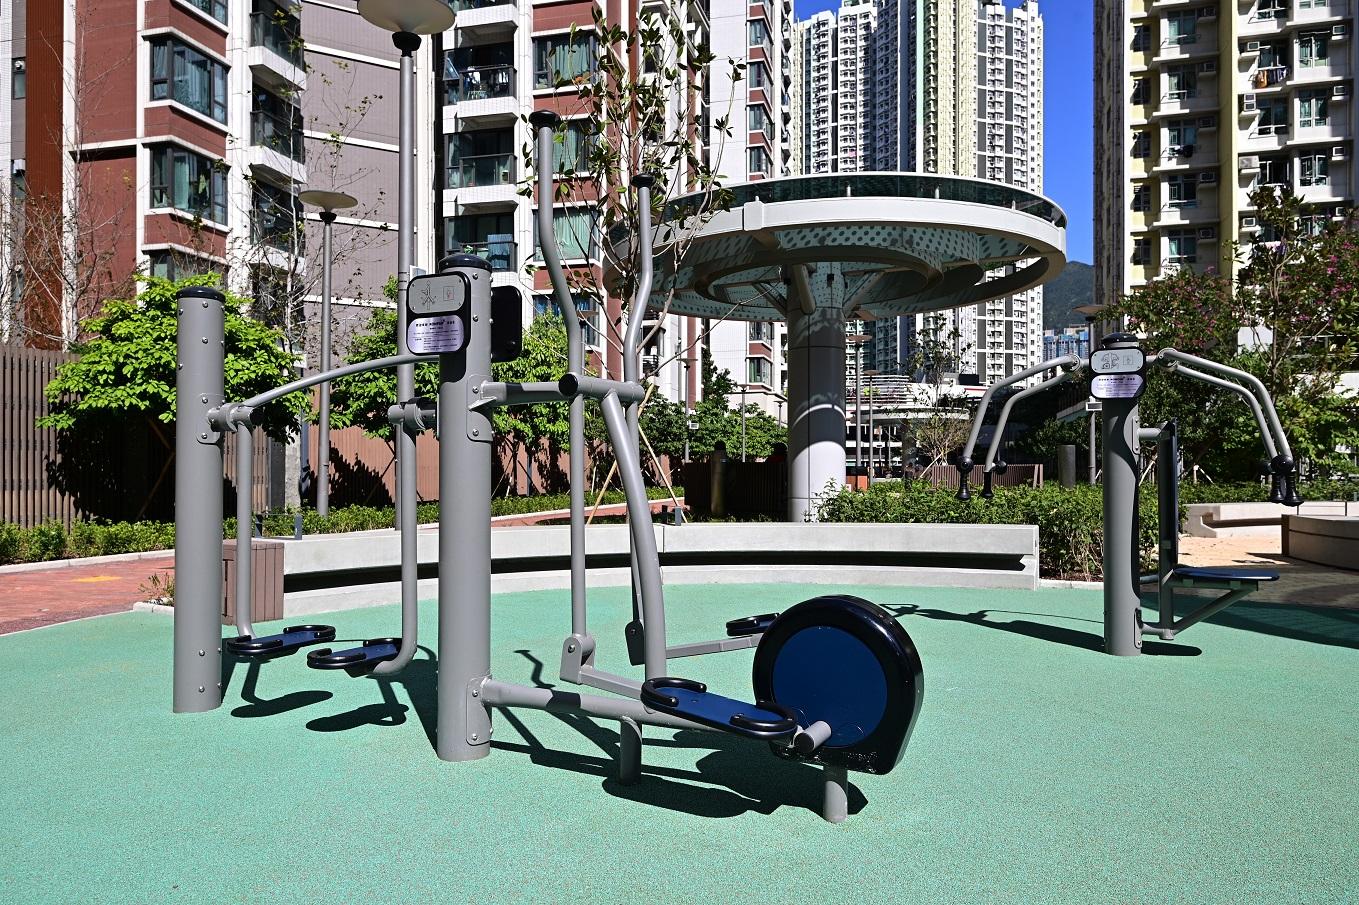 Phase I of Kai Tak Station Square and Kai Tak Avenue Park (KTAP) will open for public use from tomorrow (December 7), providing diversified recreational facilities to meet the needs of people of all ages. Photo shows the fitness equipment in the KTAP.